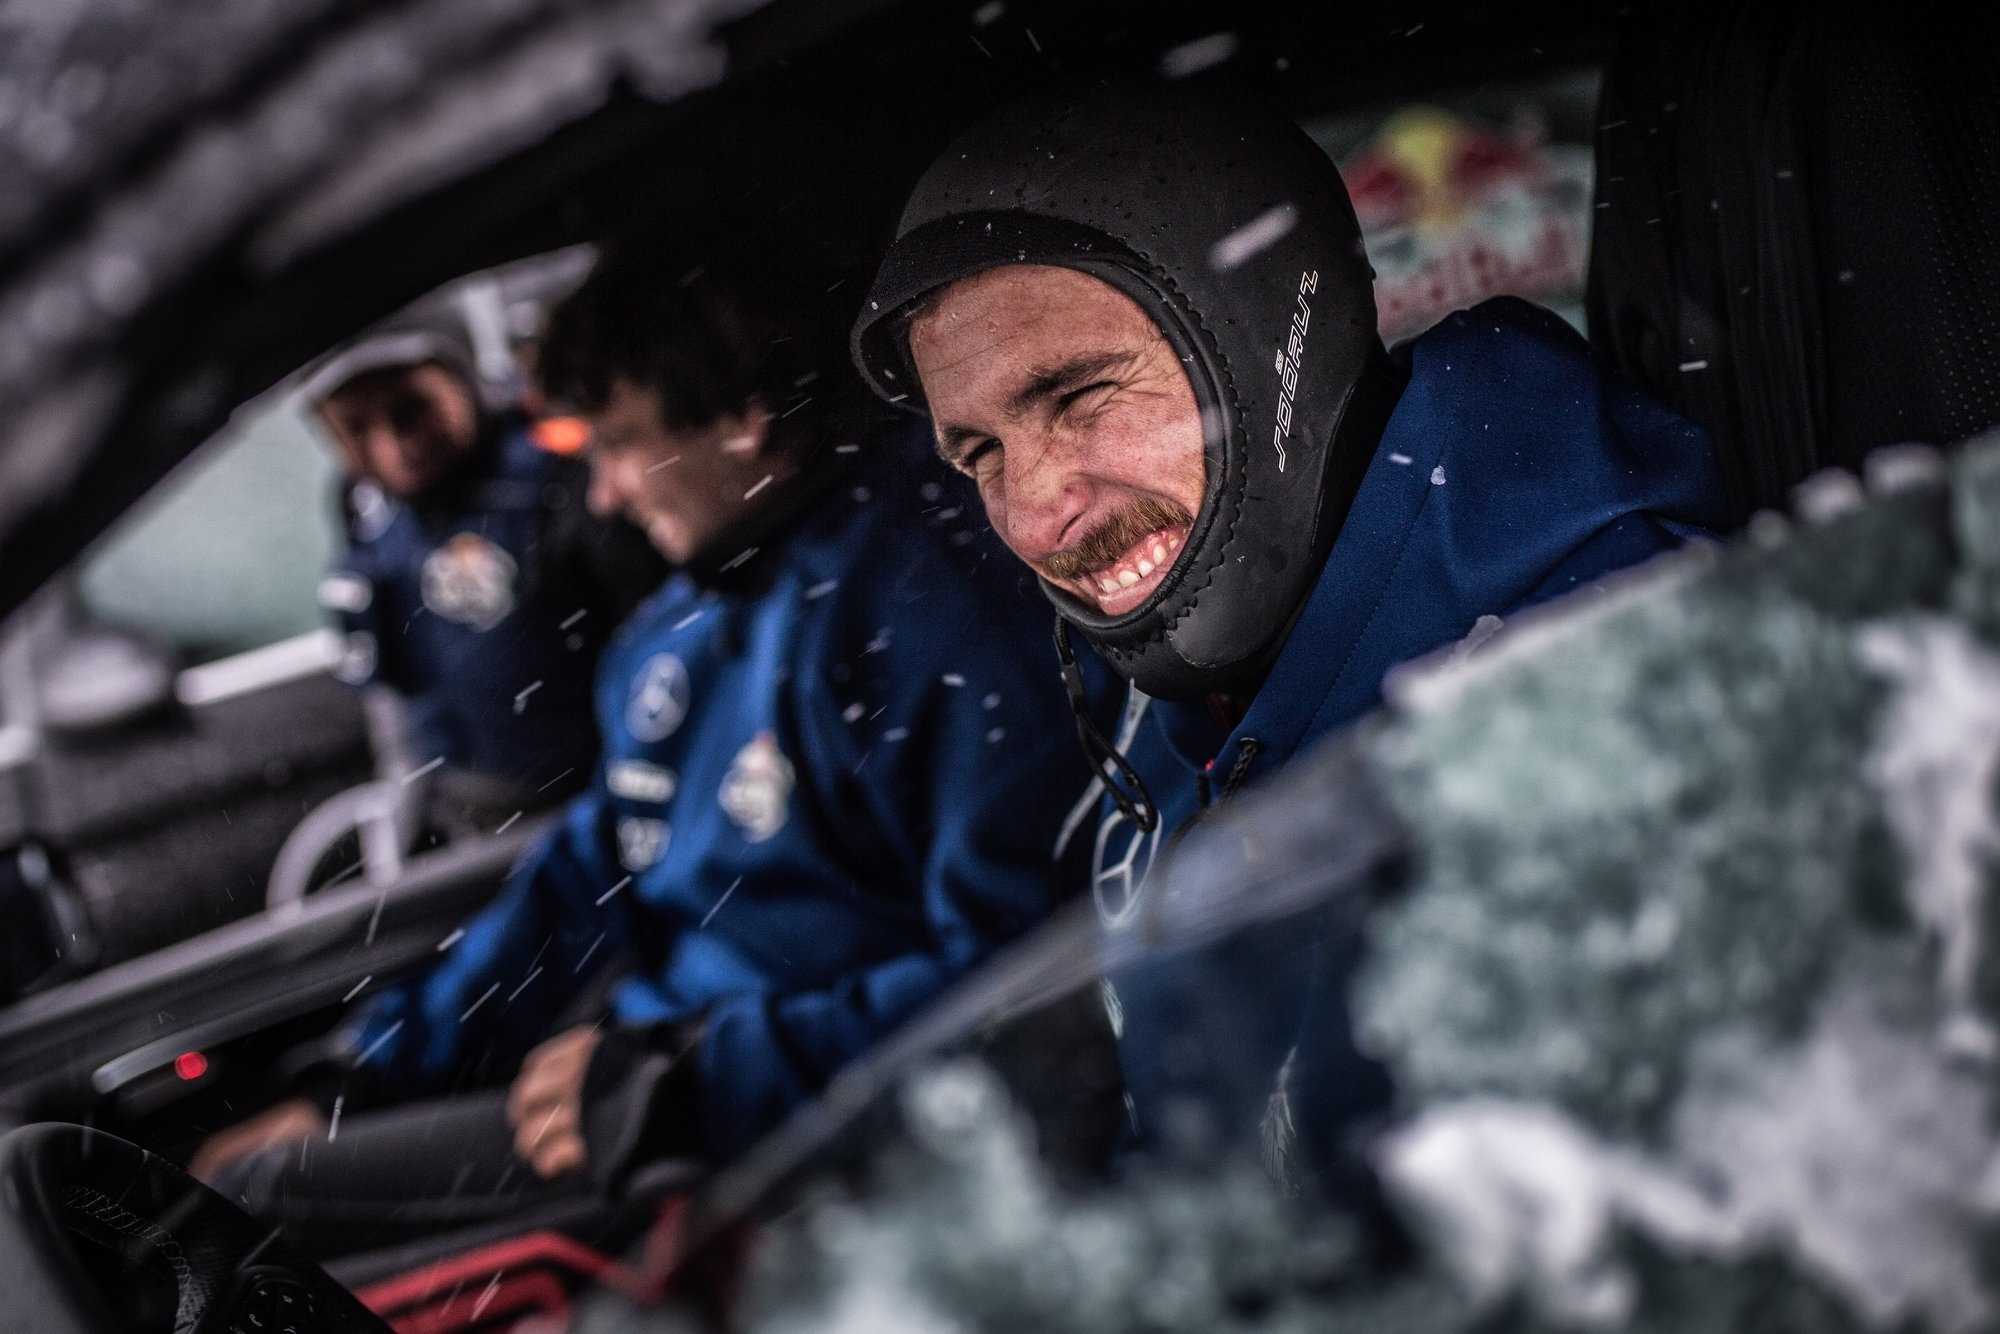 Frenchman Thomas Traversa is warming up in his car while waiting for his turn.